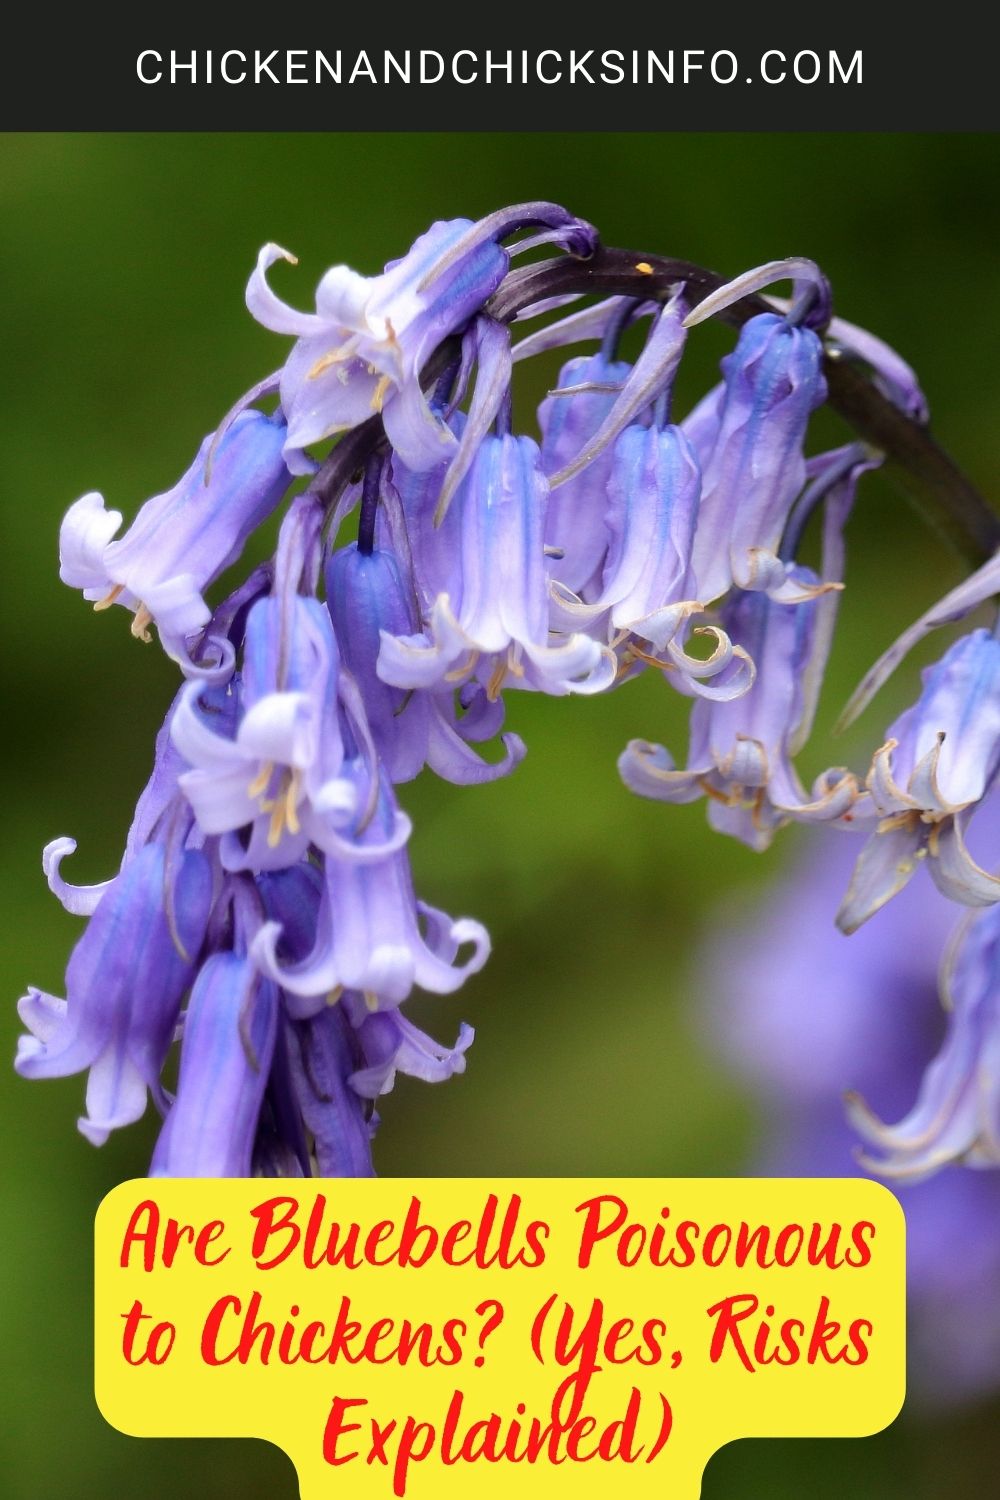 Are Bluebells Poisonous to Chickens? (Yes, Risks Explained) poster.
